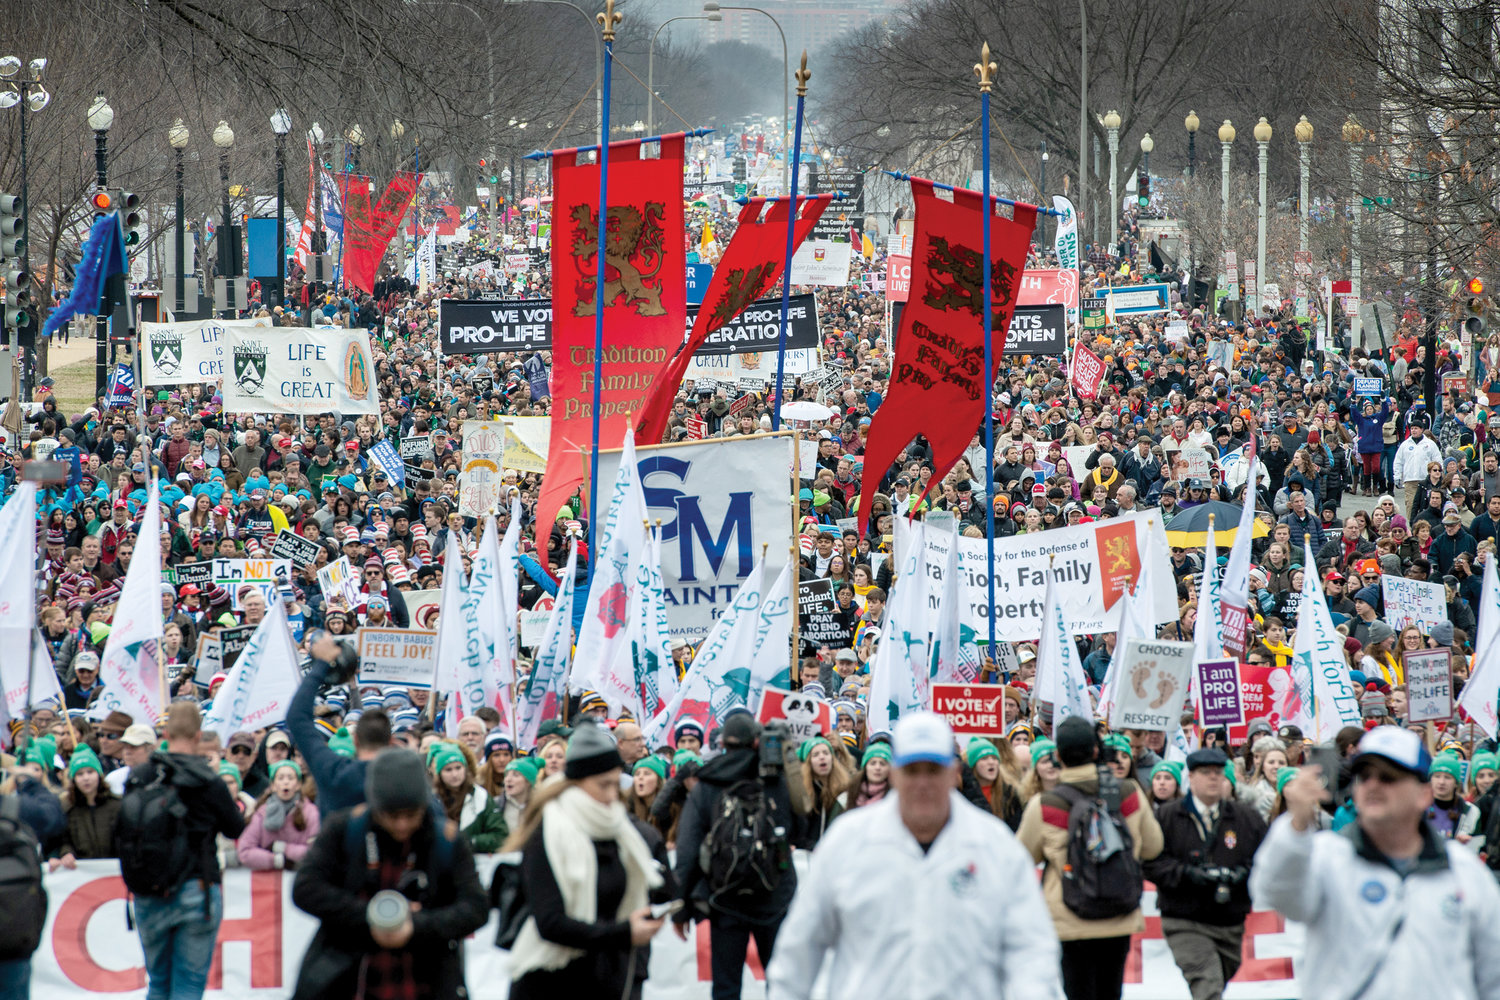 ALL FOR LIFE—A huge crowd fills Constitution Avenue in Washington, D.C., at the 47th annual March for Life Jan. 24.